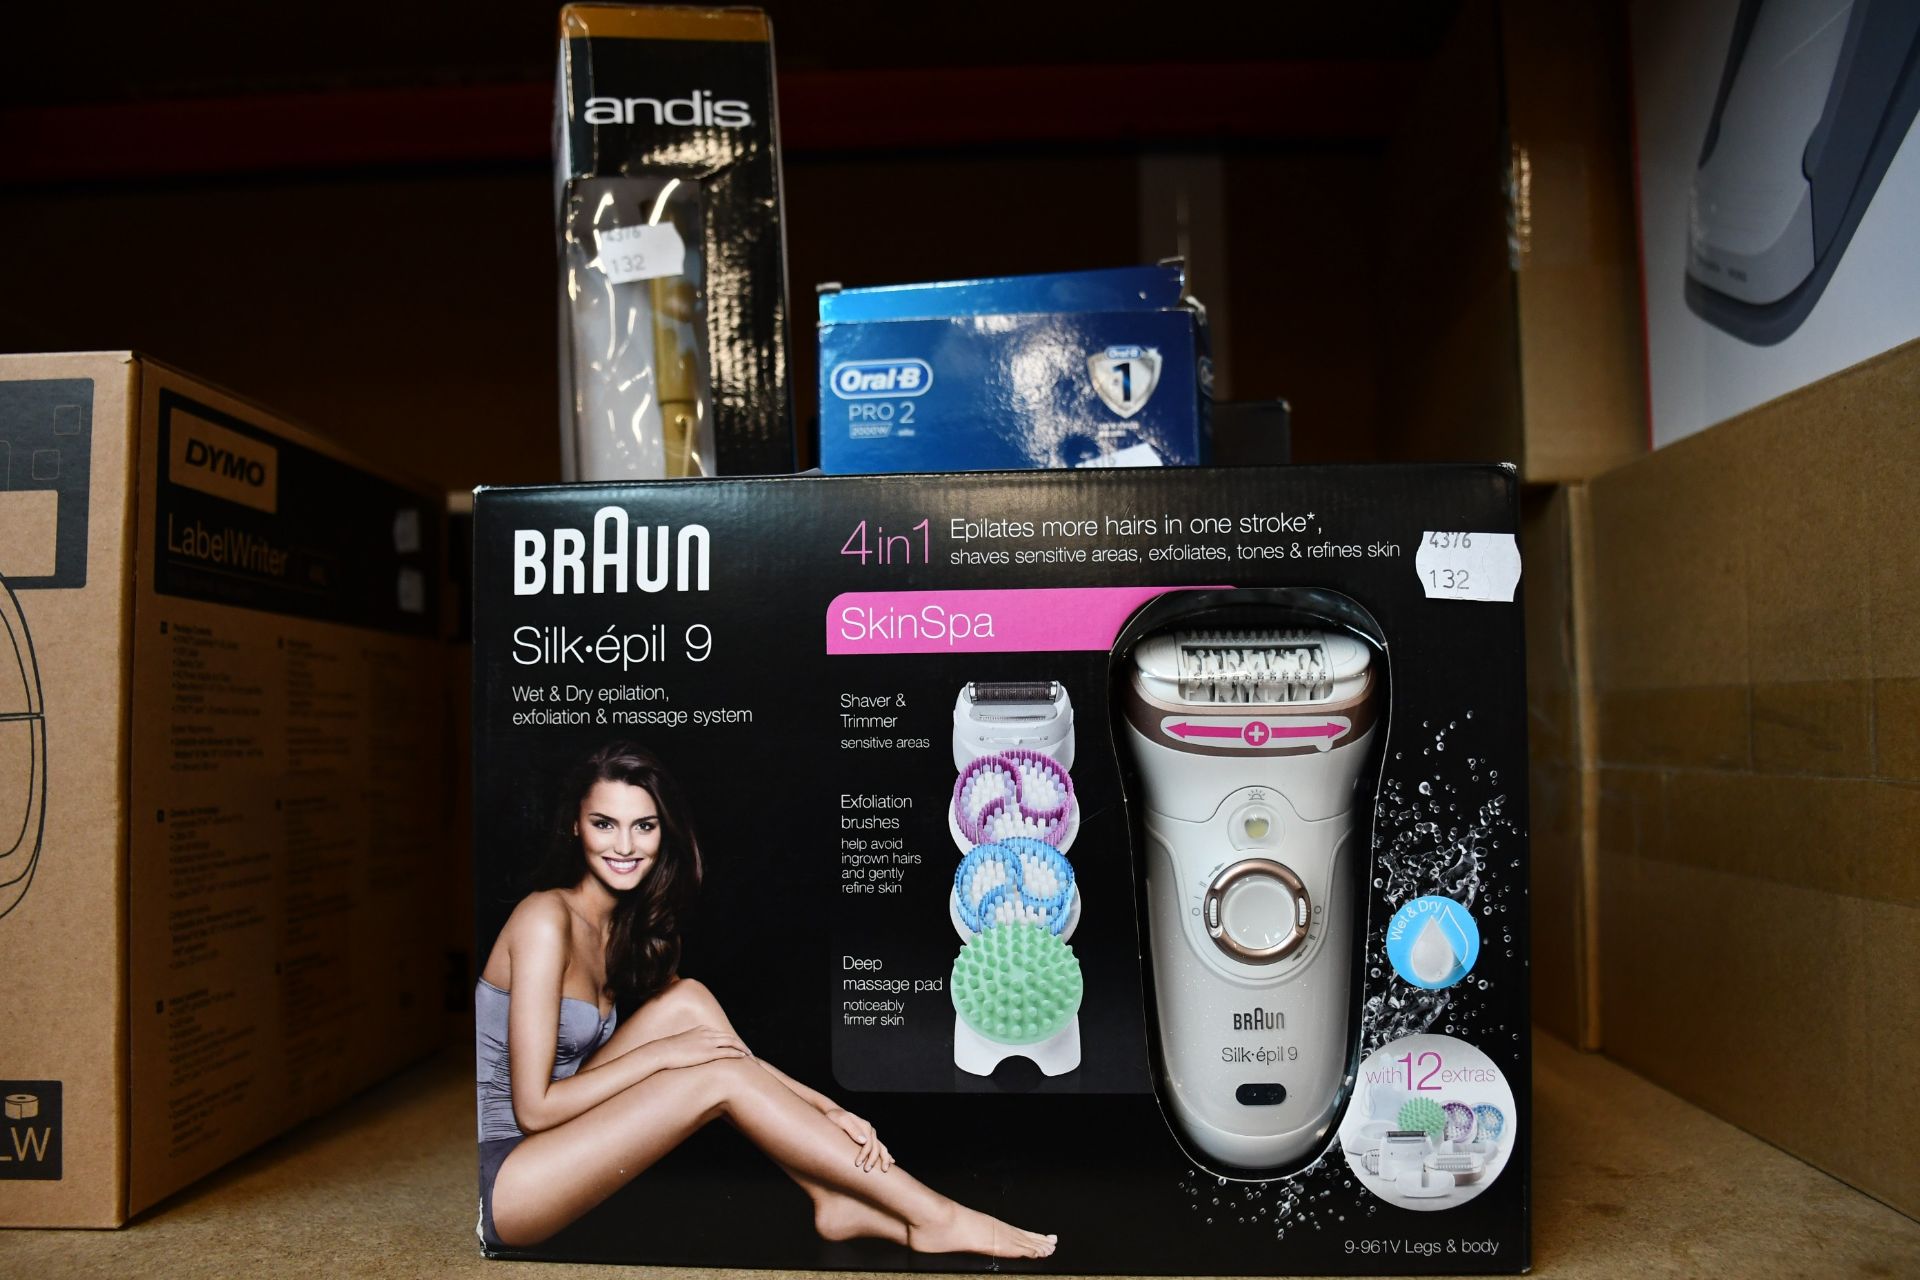 A quantity of beauty products to include Phillips Airfloss Pro and a Braun Silk 4 in 1 skin spa.